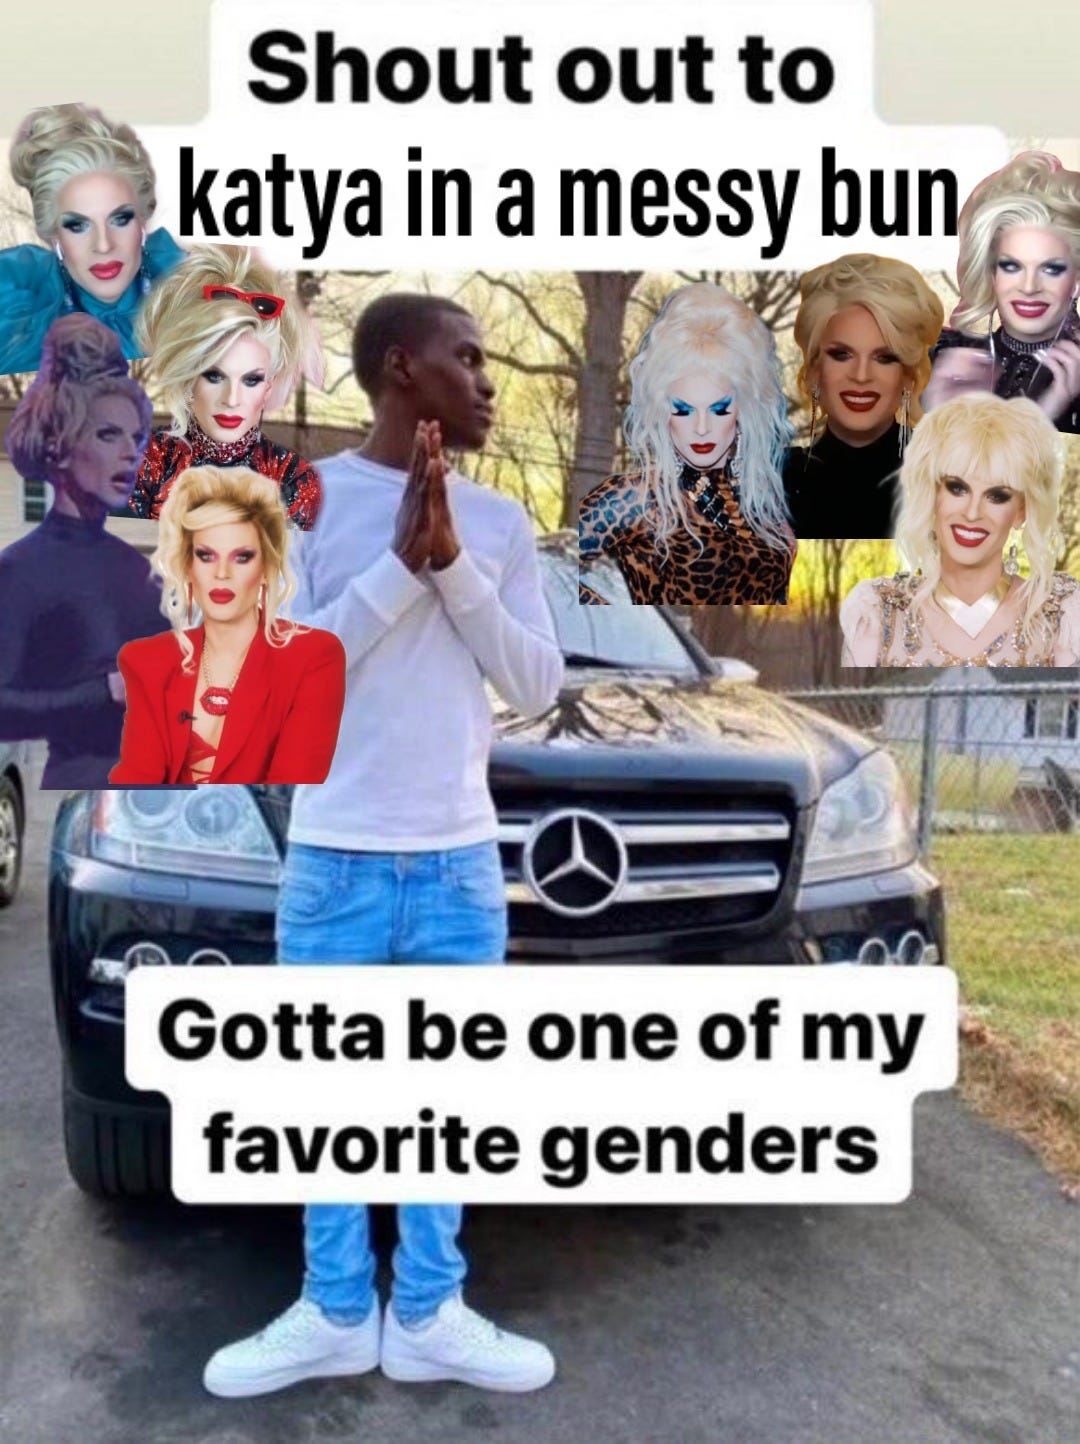 Meme that says "shoutout to Katya in a messy bun. Gotta be one of my favorite genders." The text overlays an image of a man making prayer hands in front of a car. Images of Katya surround him and the car.